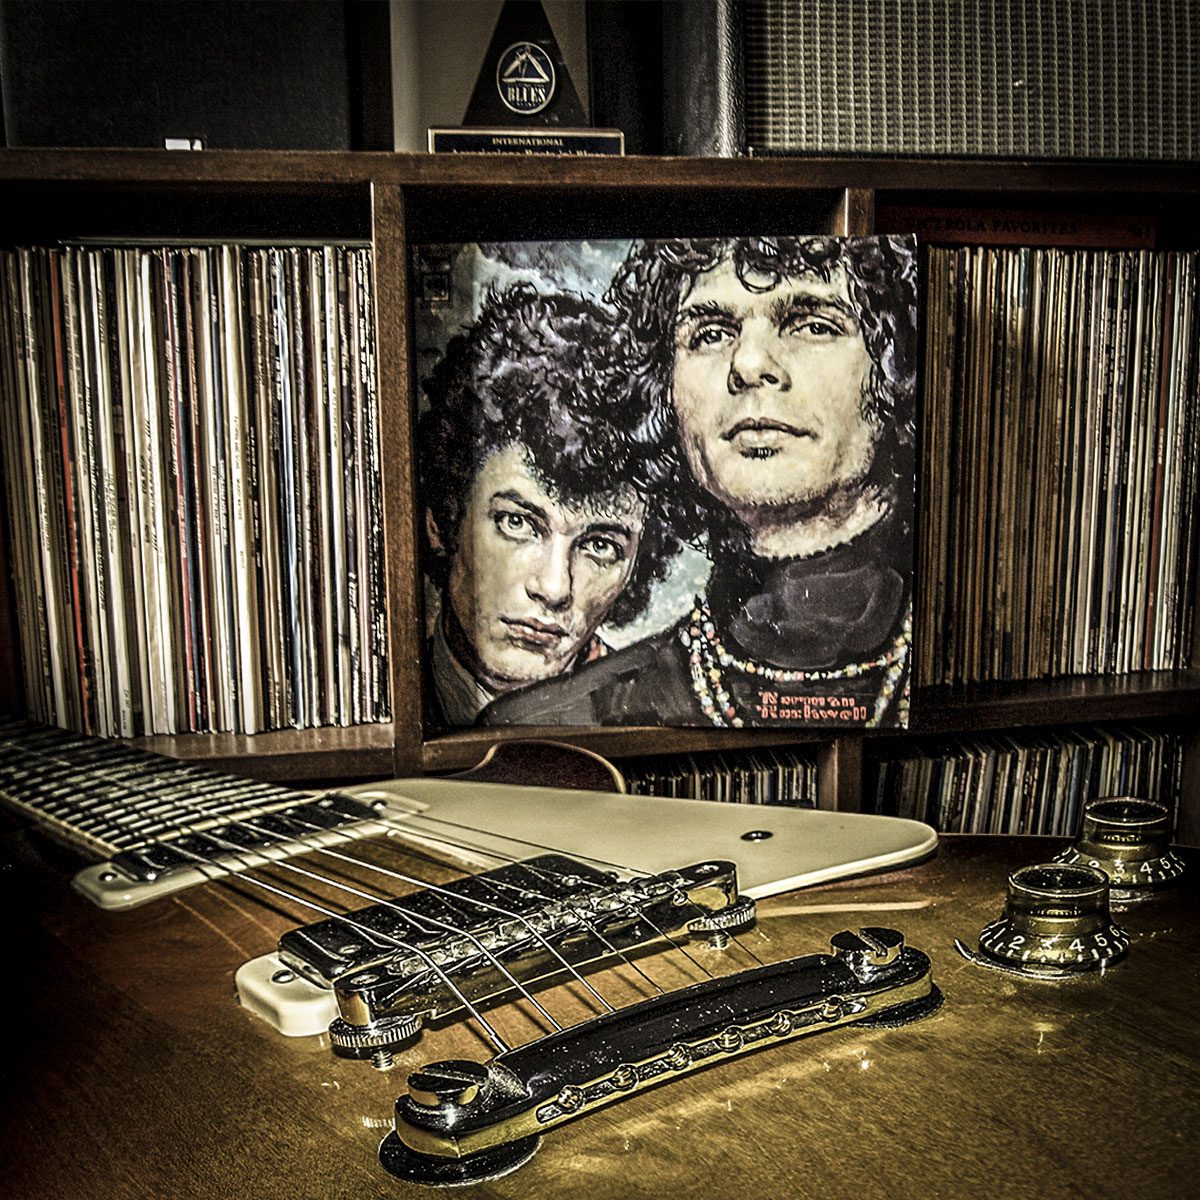 The Live Adventures Of Mike Bloomflied And Al Kooper